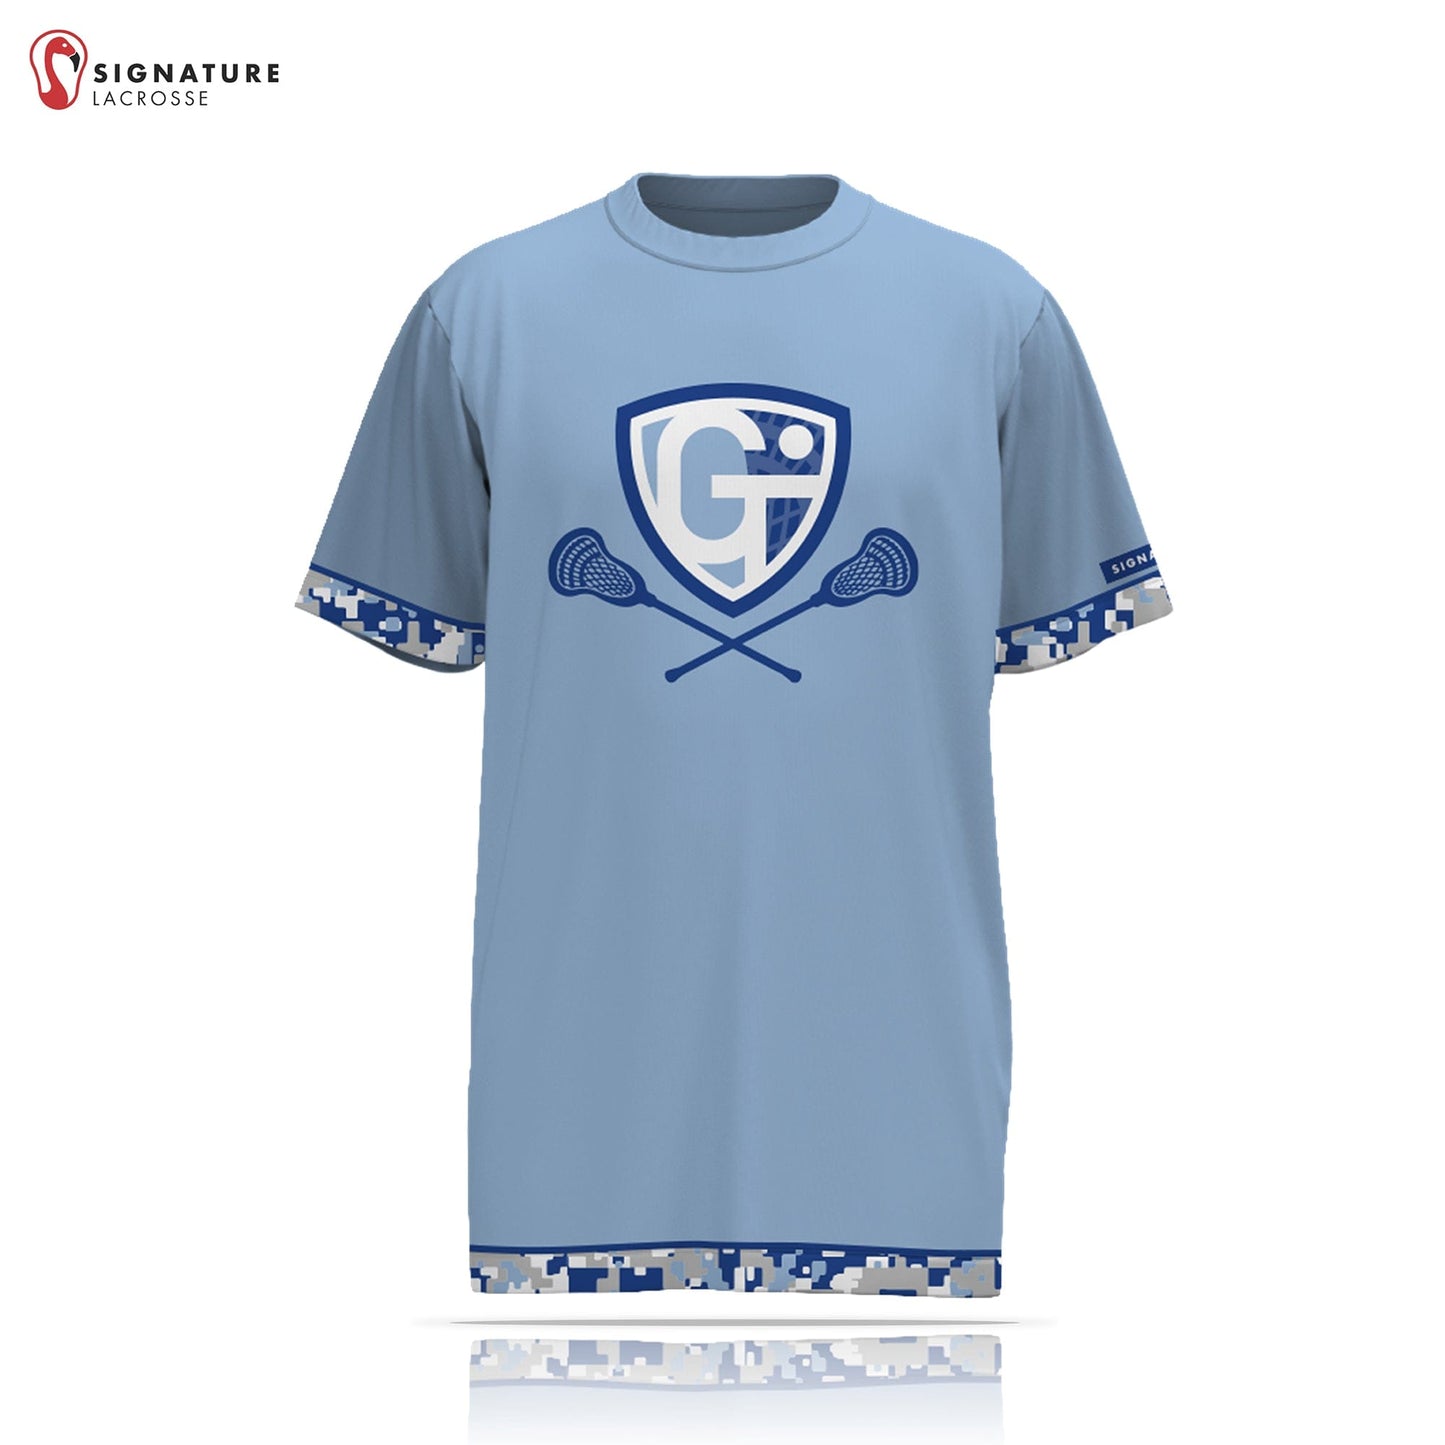 Georgetown-Triton Youth Lacrosse Player Short Sleeve Shooting Shirt: 7-8 Signature Lacrosse